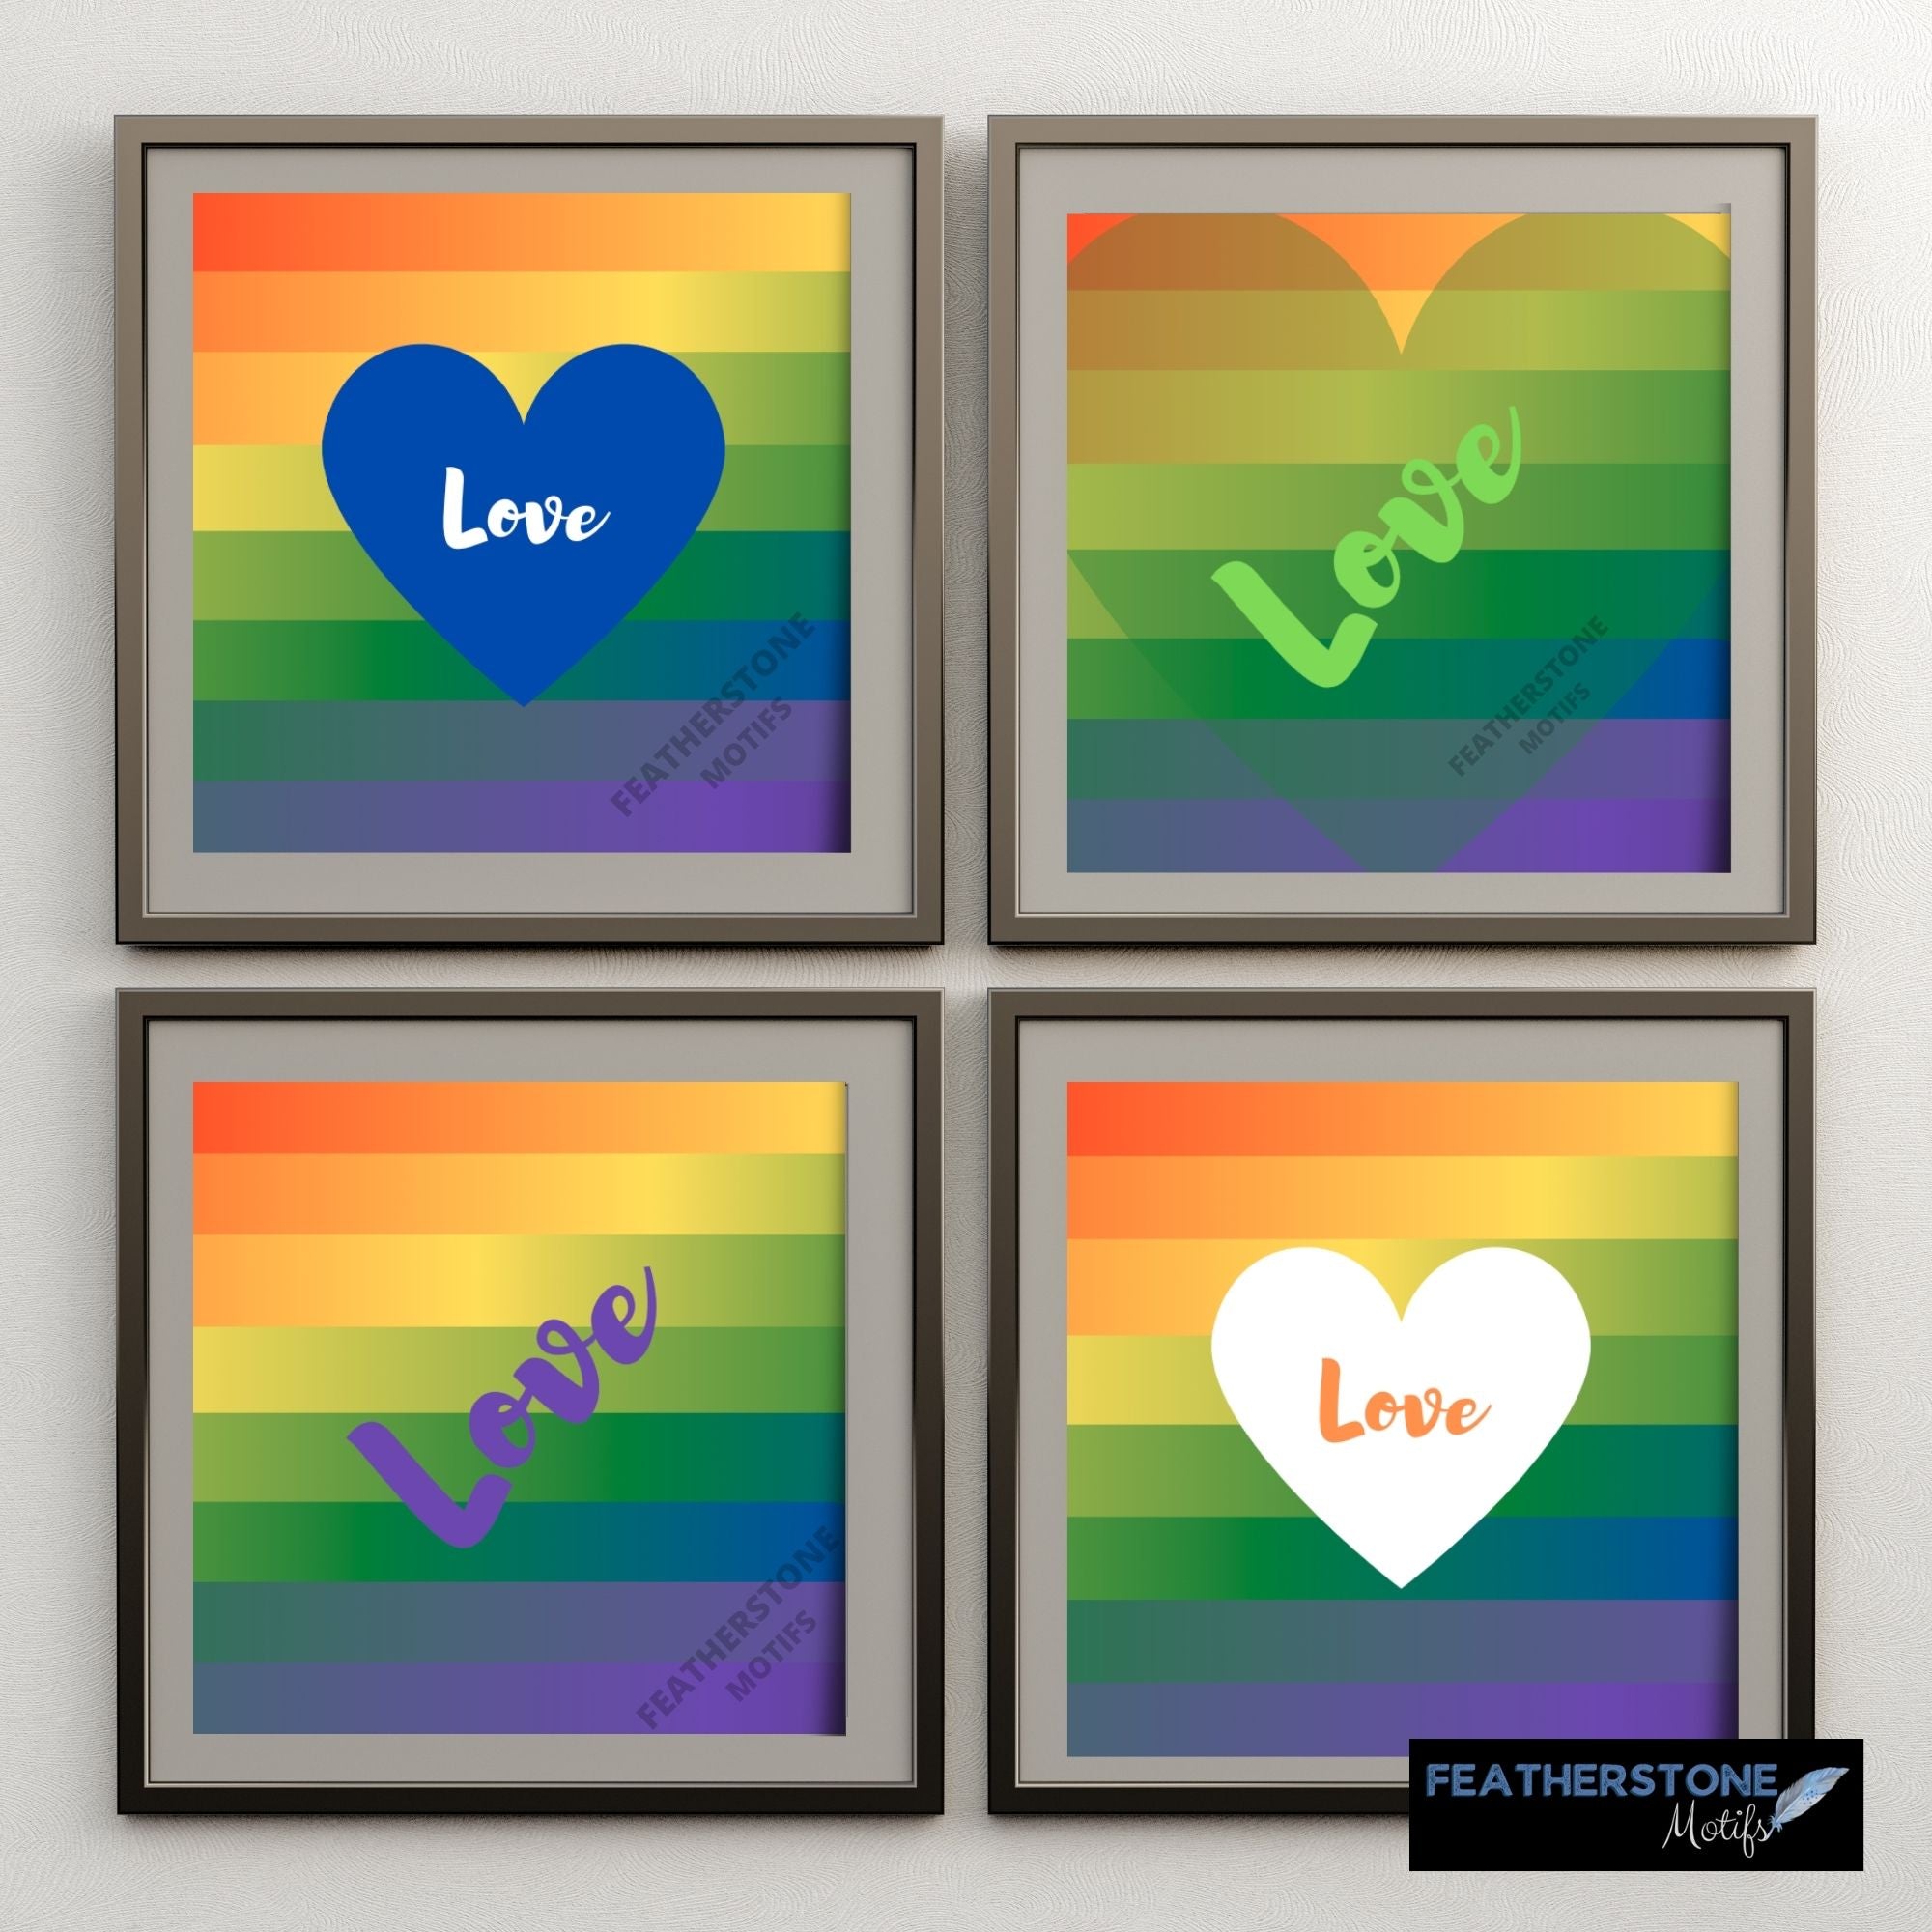 Show your Pride with this set of 35 digital images! Use for craft projects like handmade coasters and greeting cards, or frame and hang them on the wall.